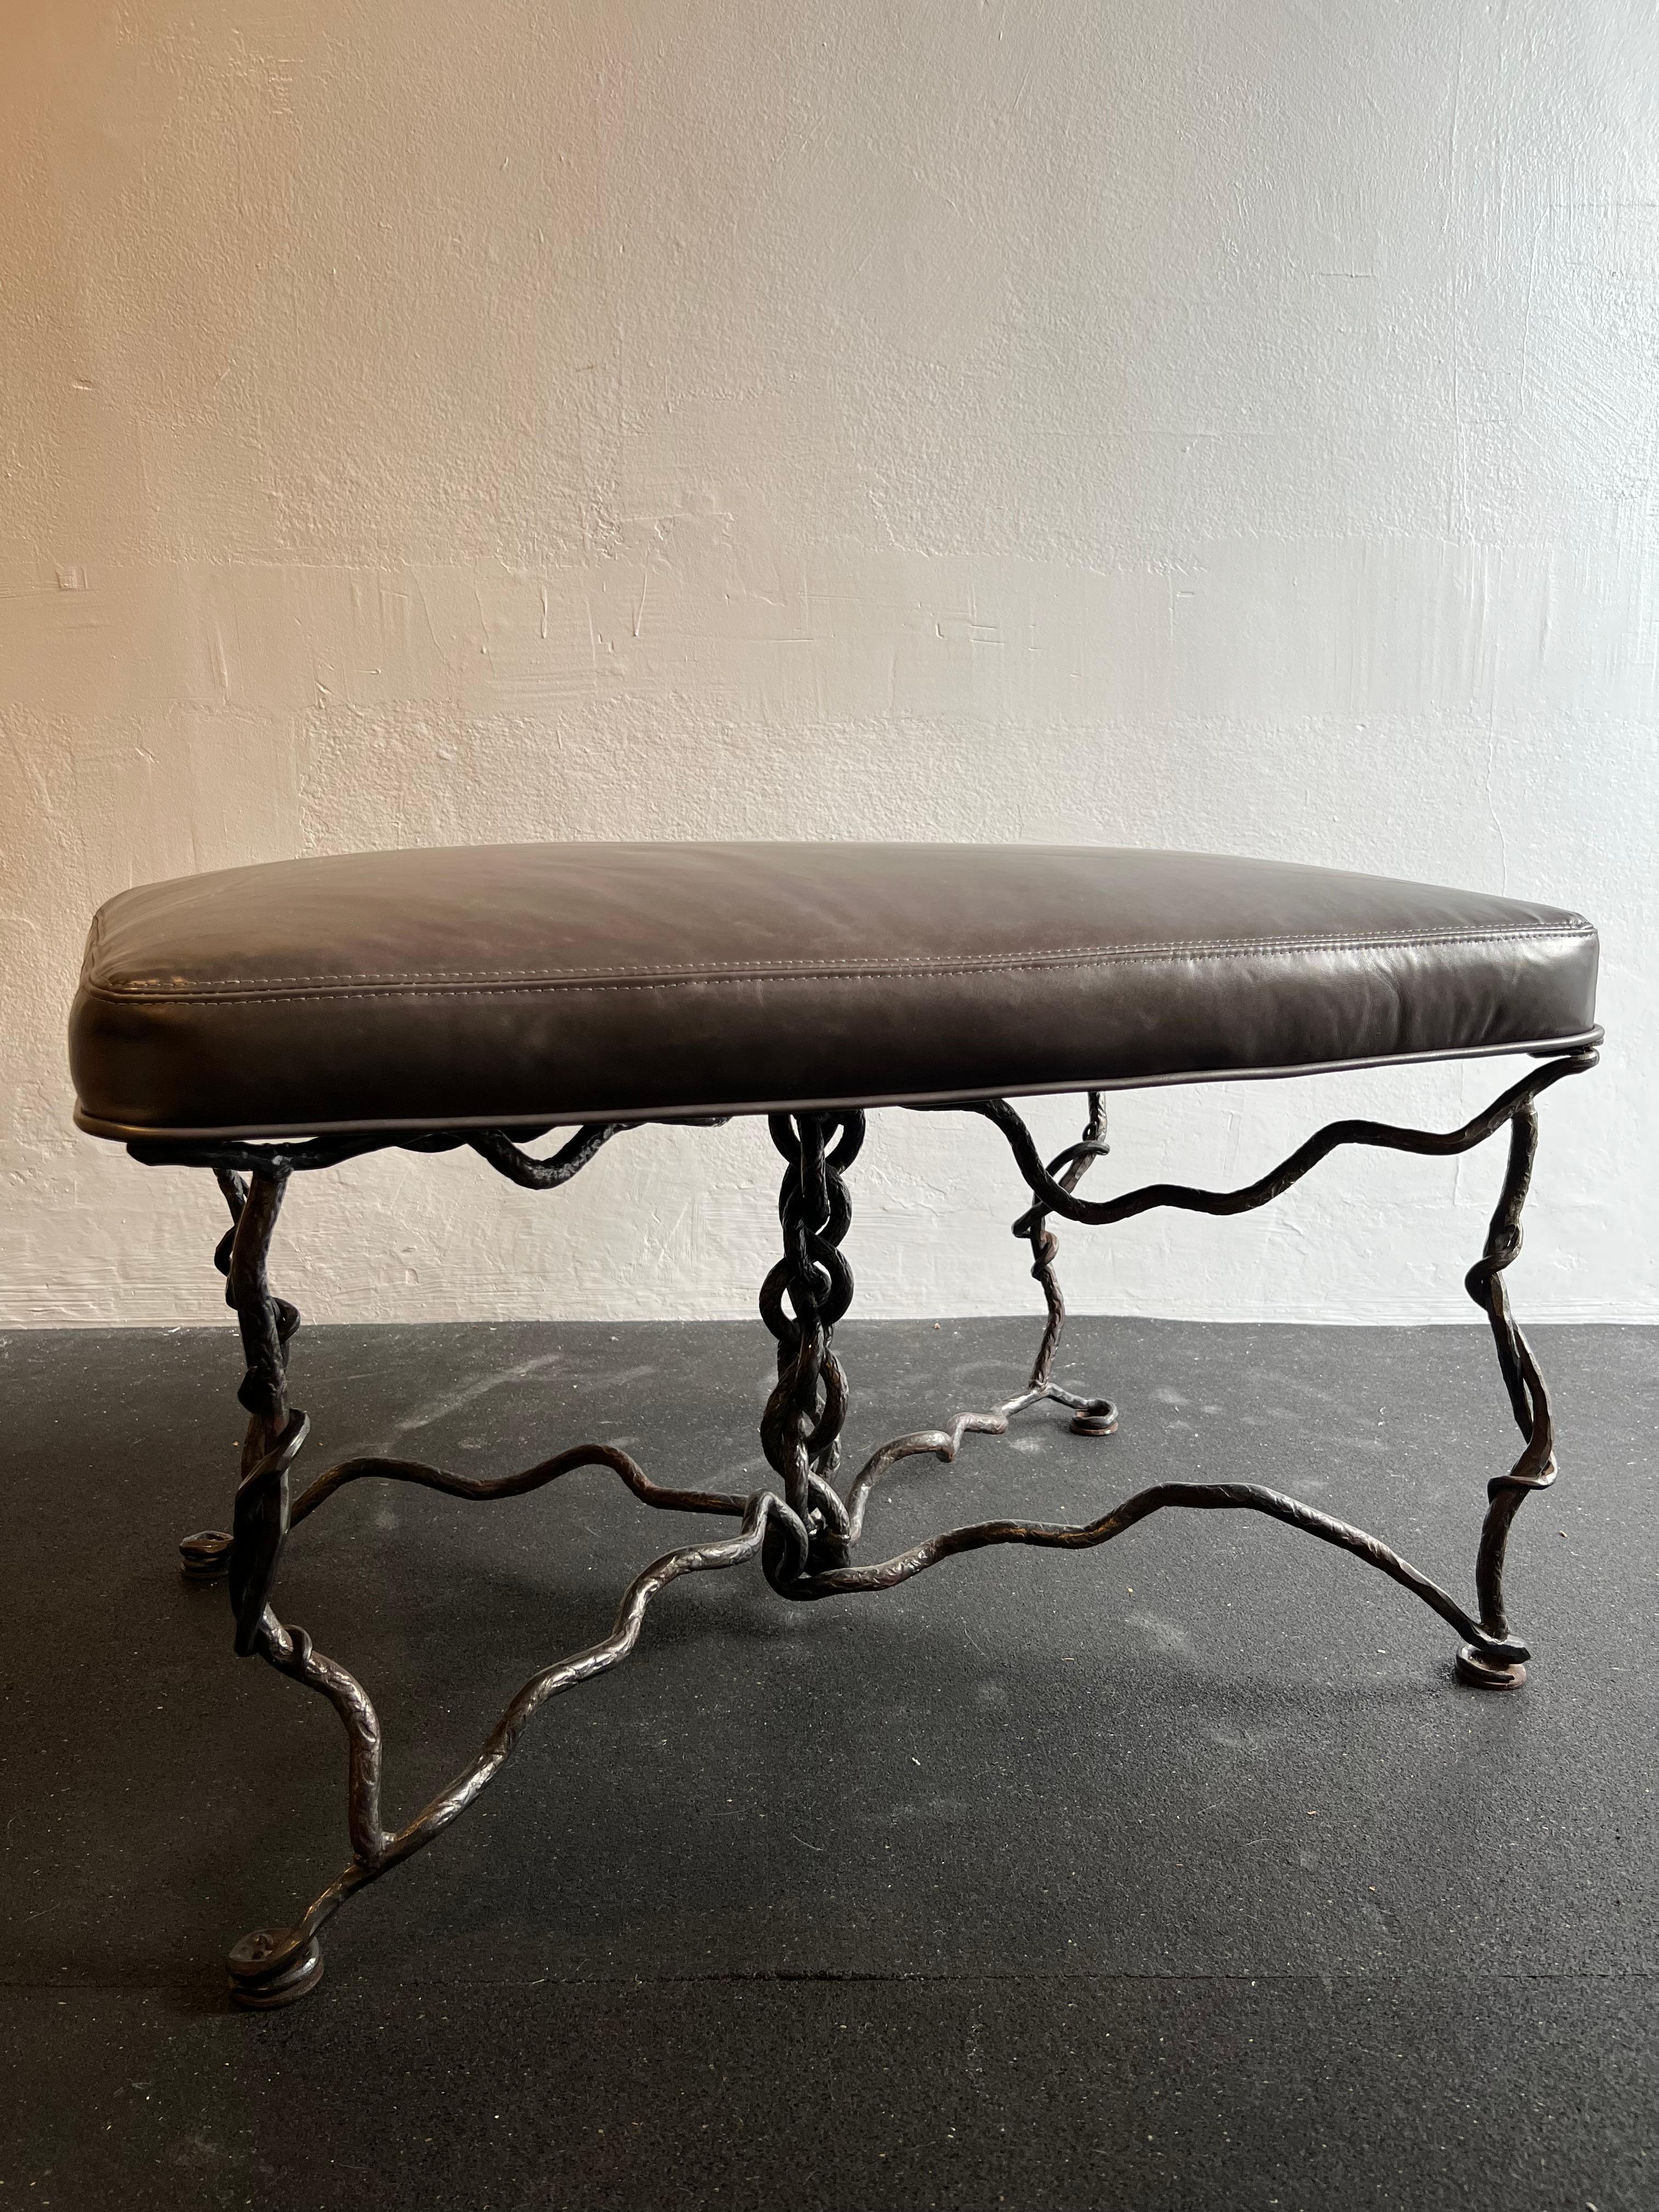 Giacometti style brutalist iron bench with leather upholstery. The top has been reupholstered in a heavy grade distressed leather. Base shows wear consistent with age. (please refer to photos). Additional photos available upon request.

Would work